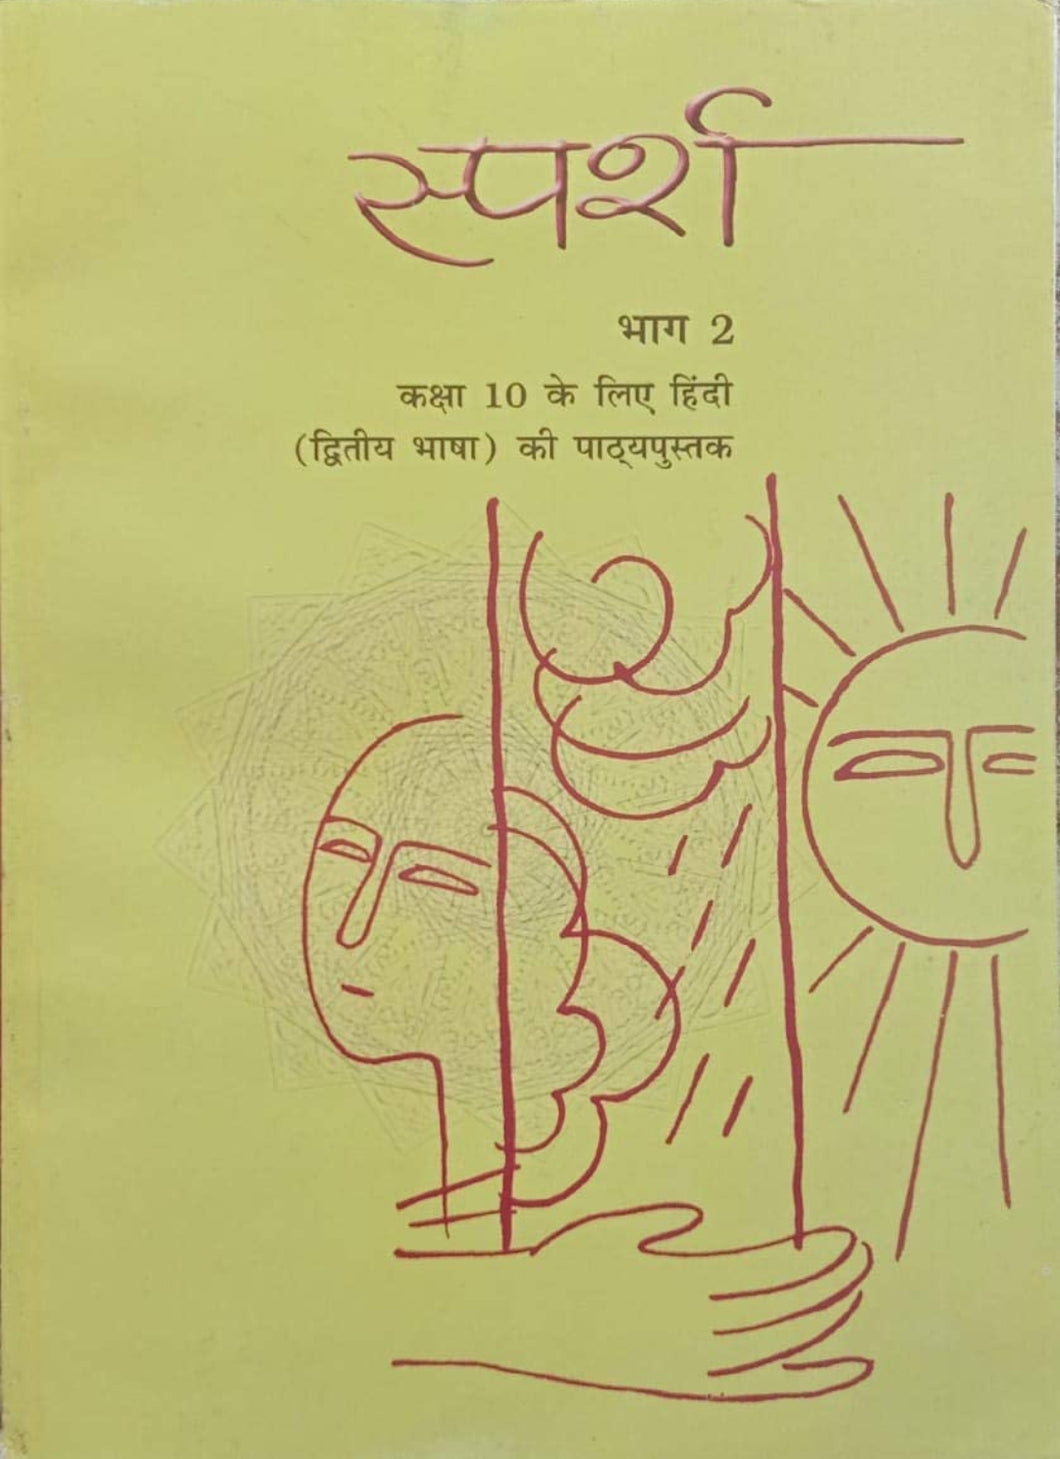 NCERT Sparsh -2nd Language Hindi for Class 10 - latest edition as per NCERT/CBSE - Booksfy